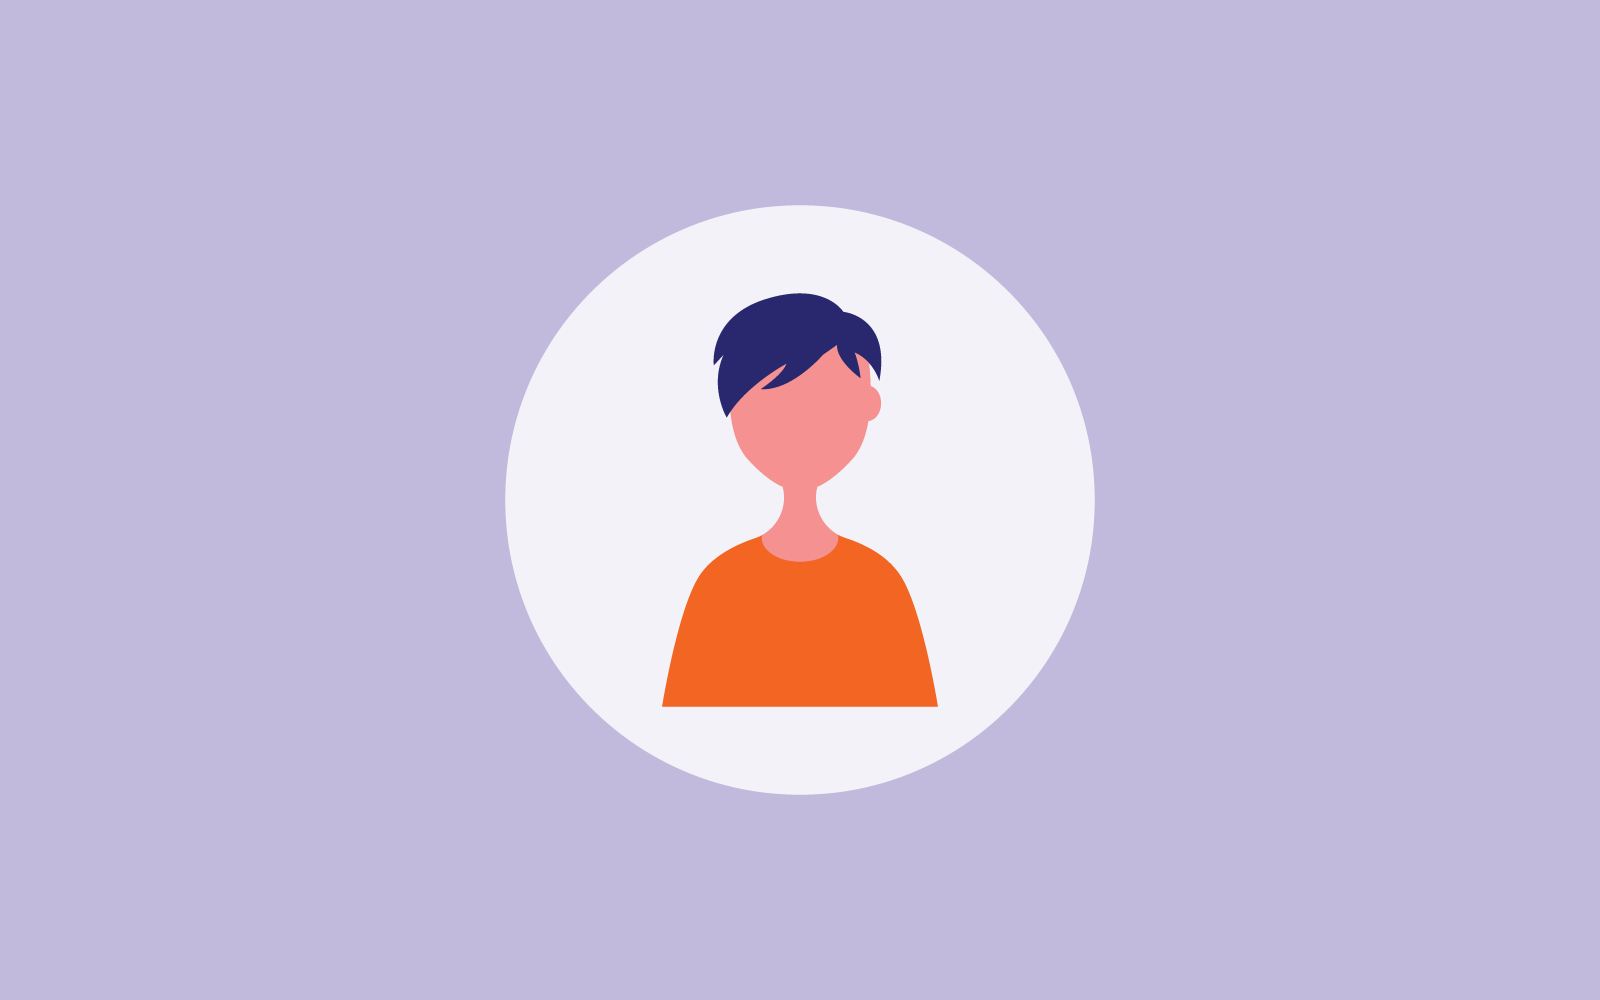 Character people on video conference cartoon flat design